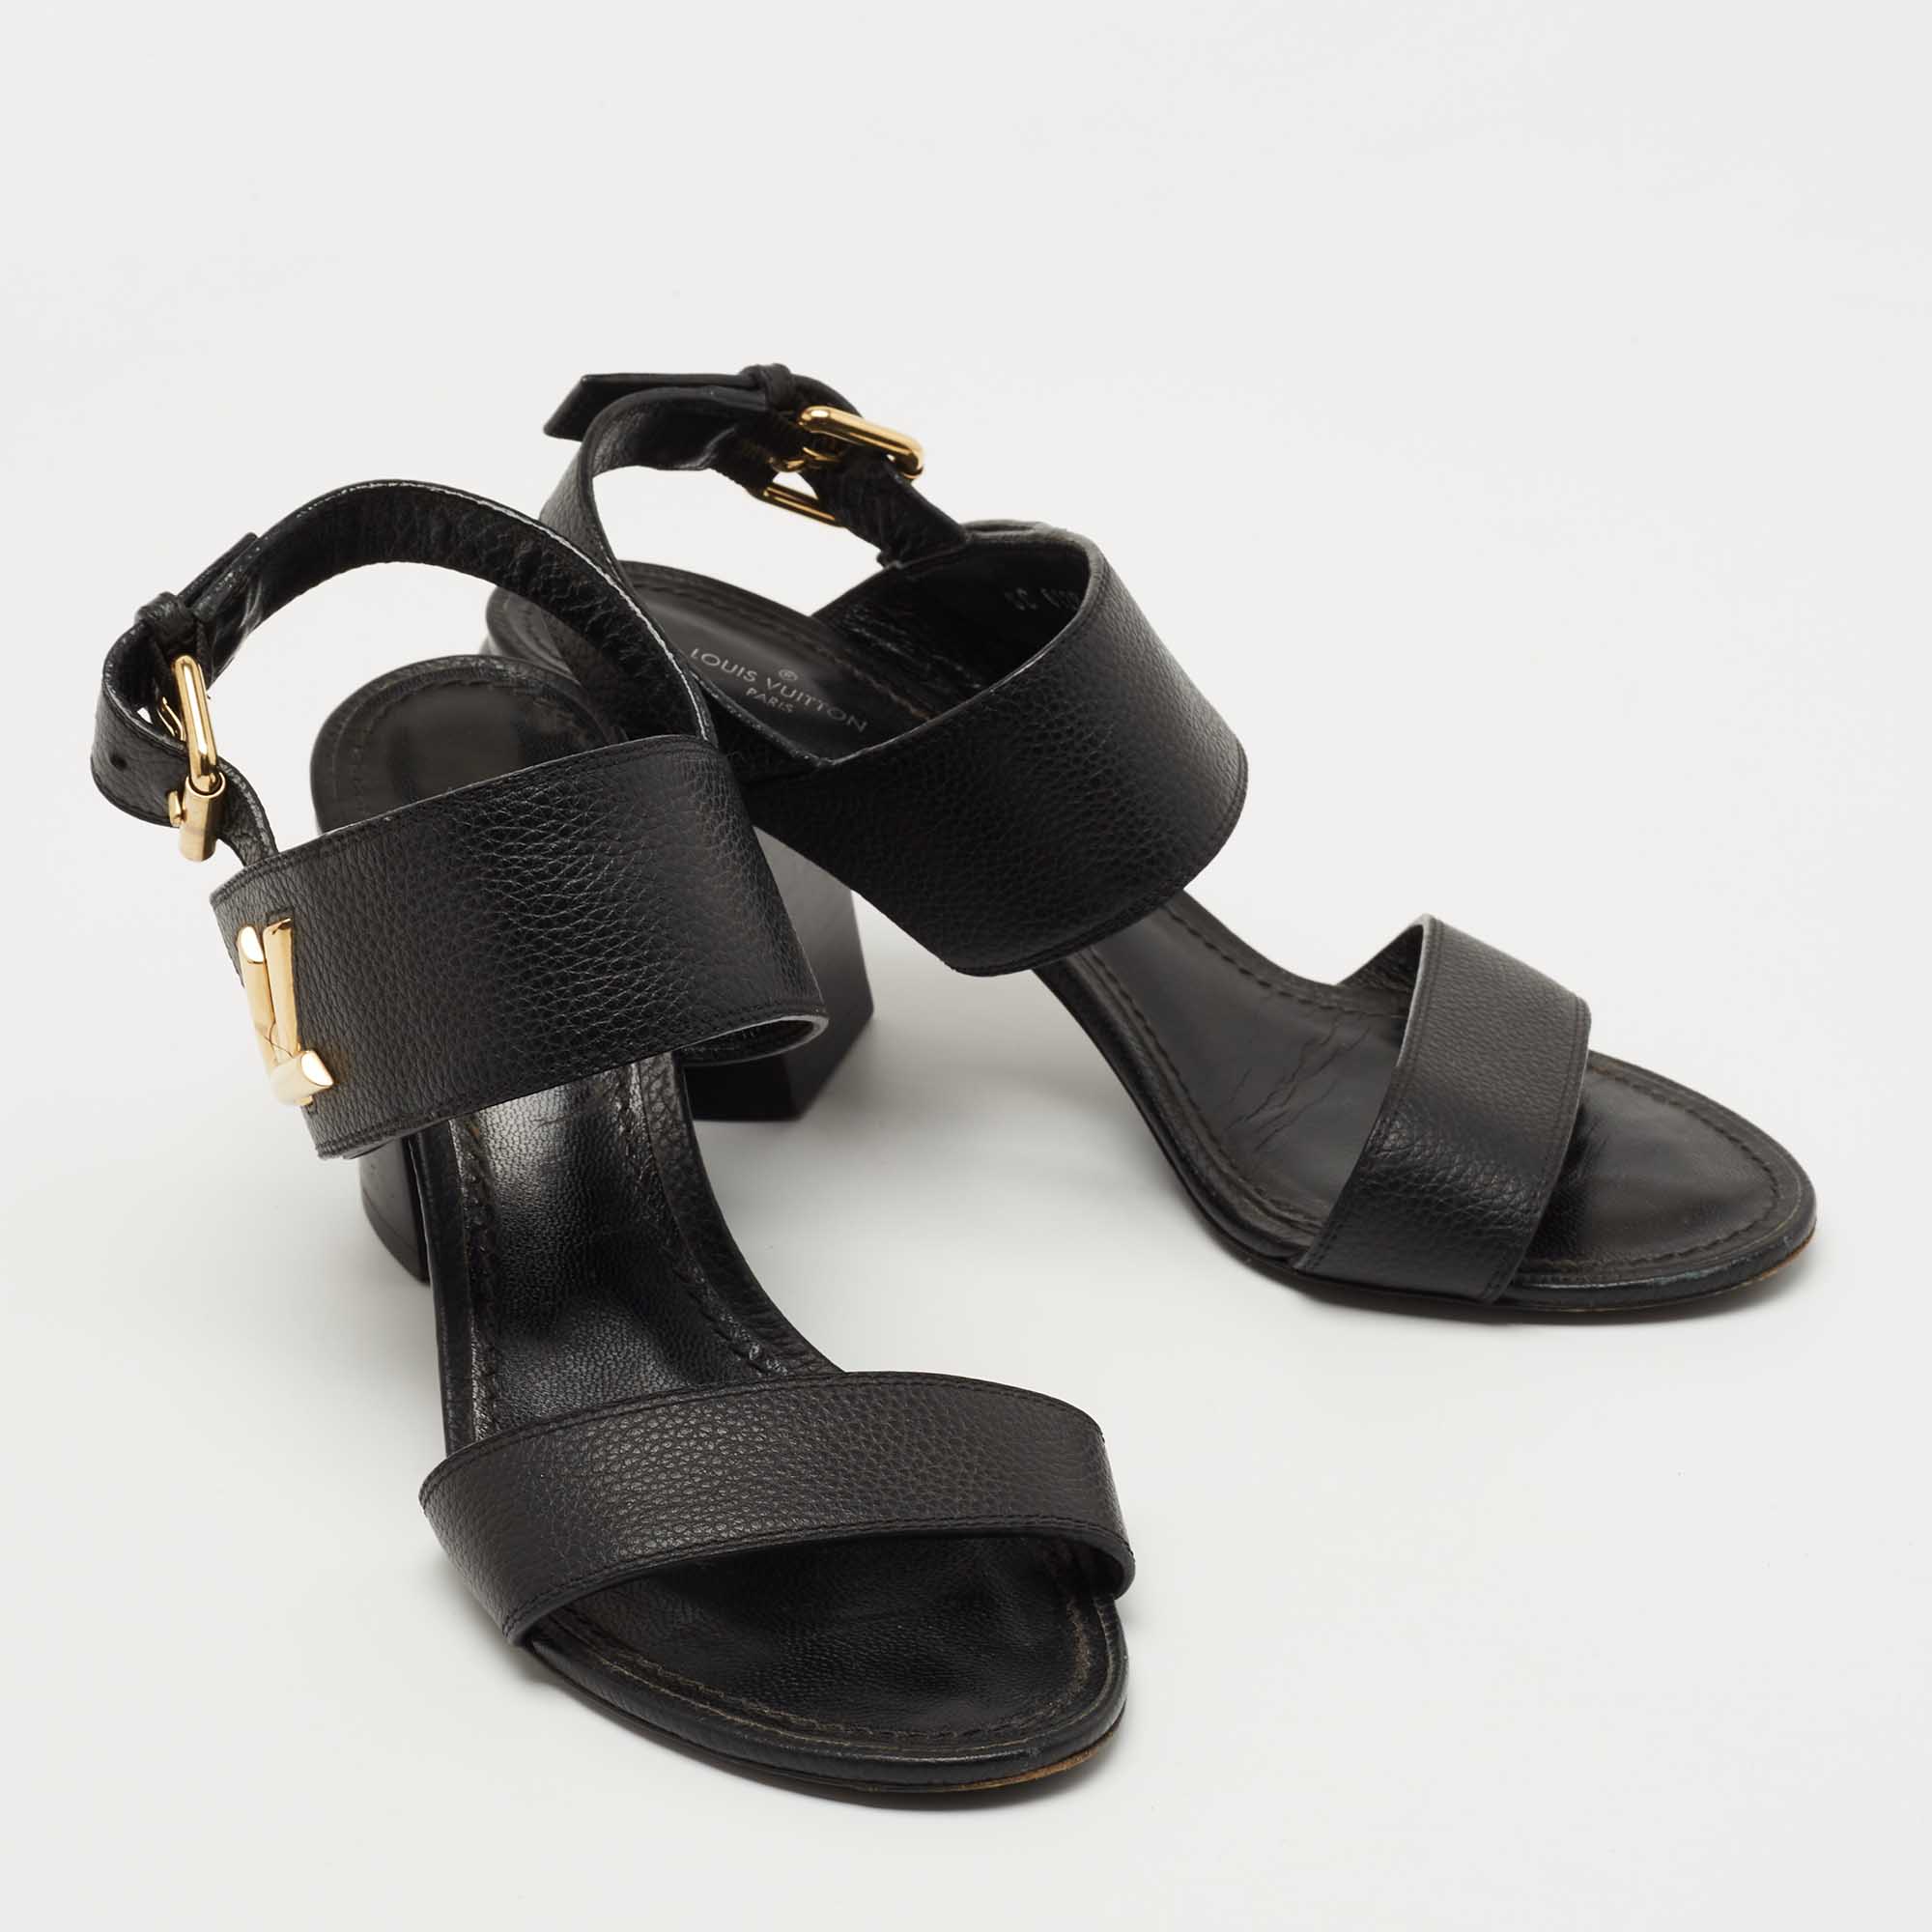 Leather sandals Louis Vuitton Black size 37 EU in Leather - 33153958